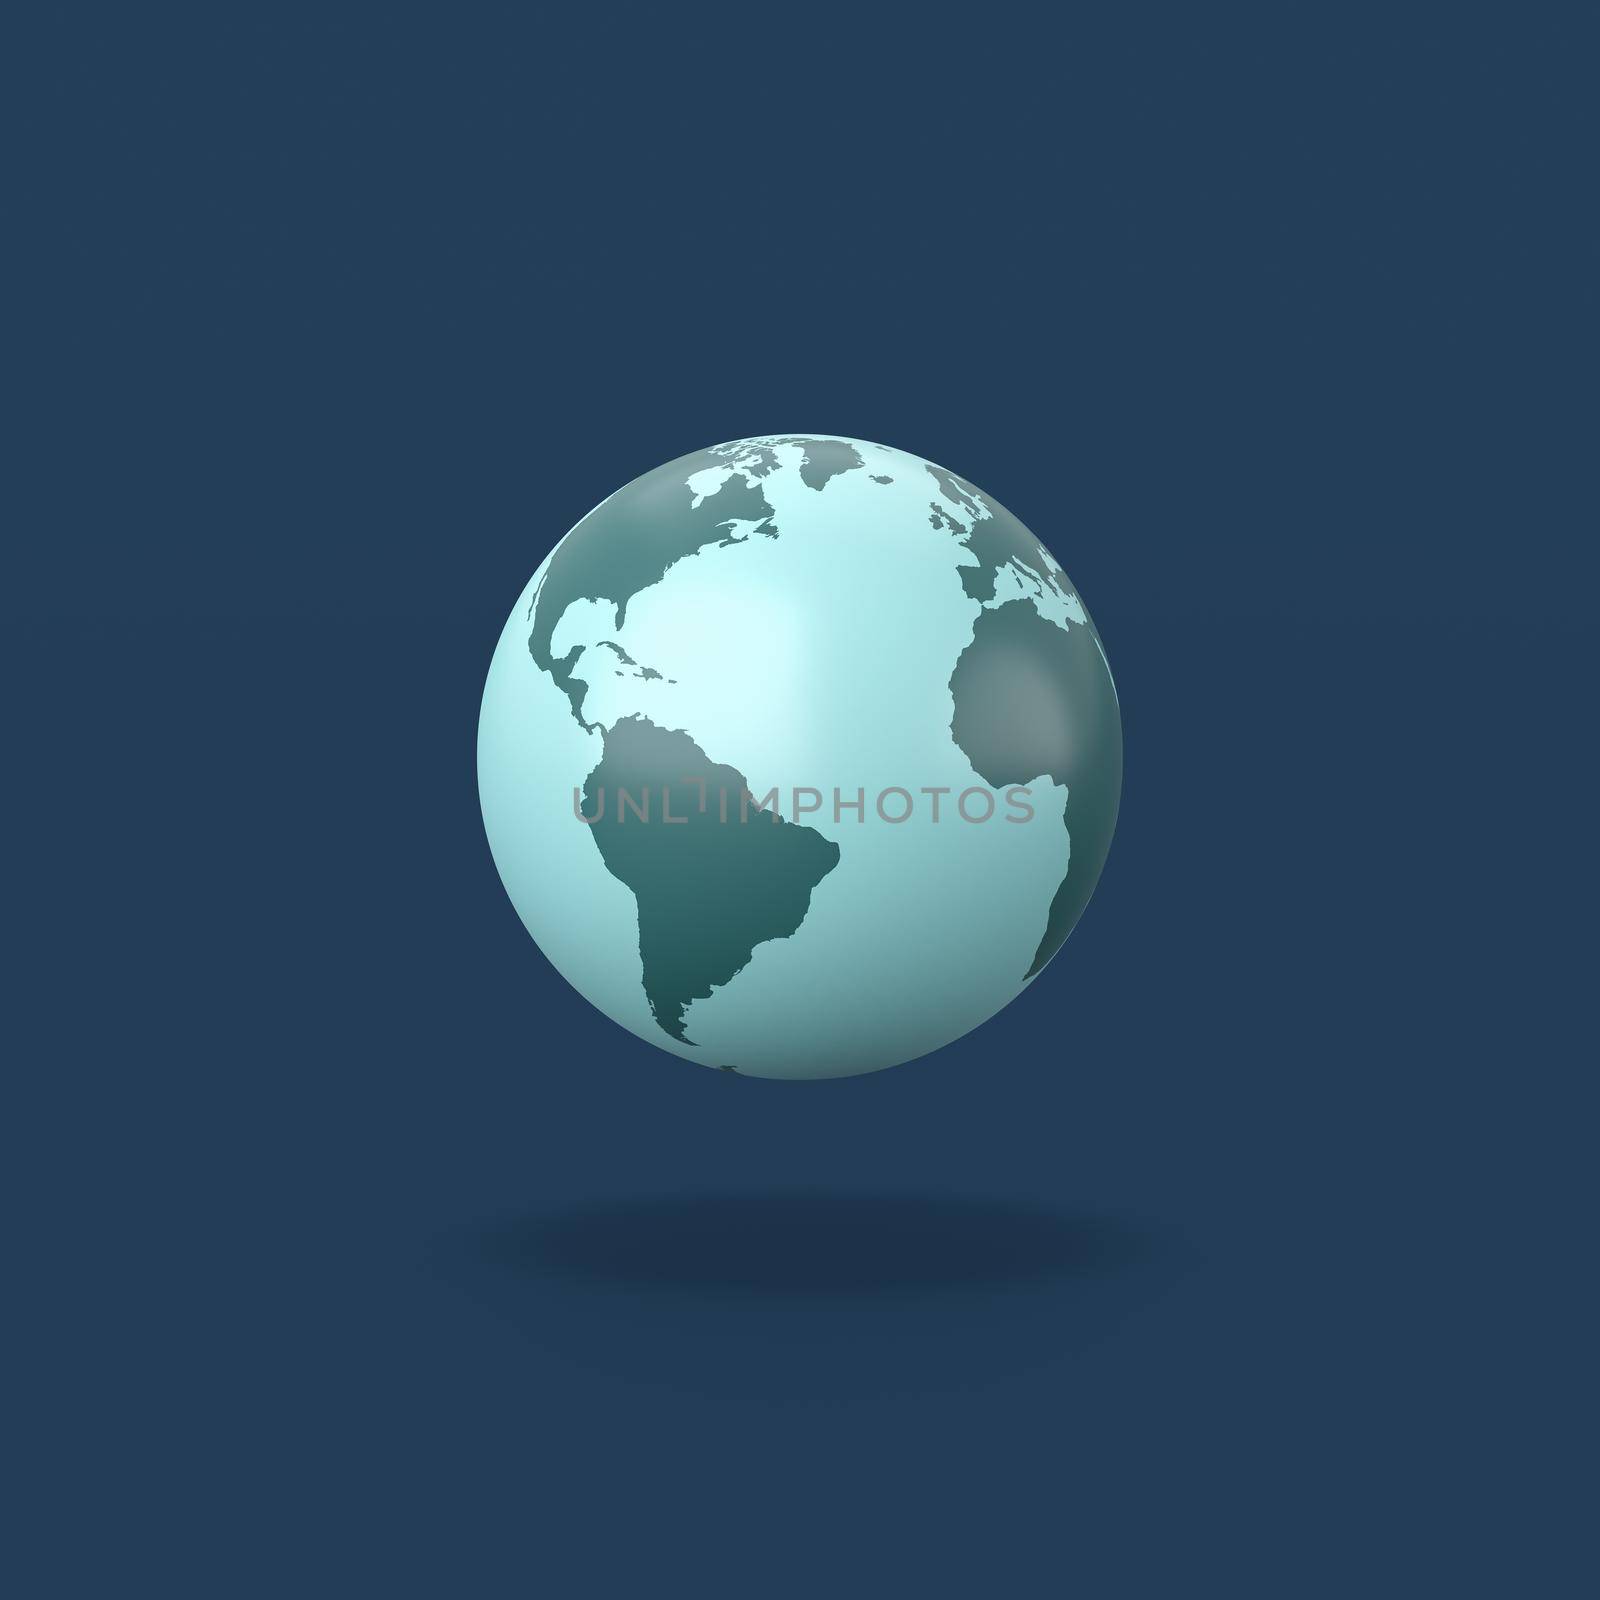 World Planet Isolated on Flat Blue Background with Shadow 3D Illustration